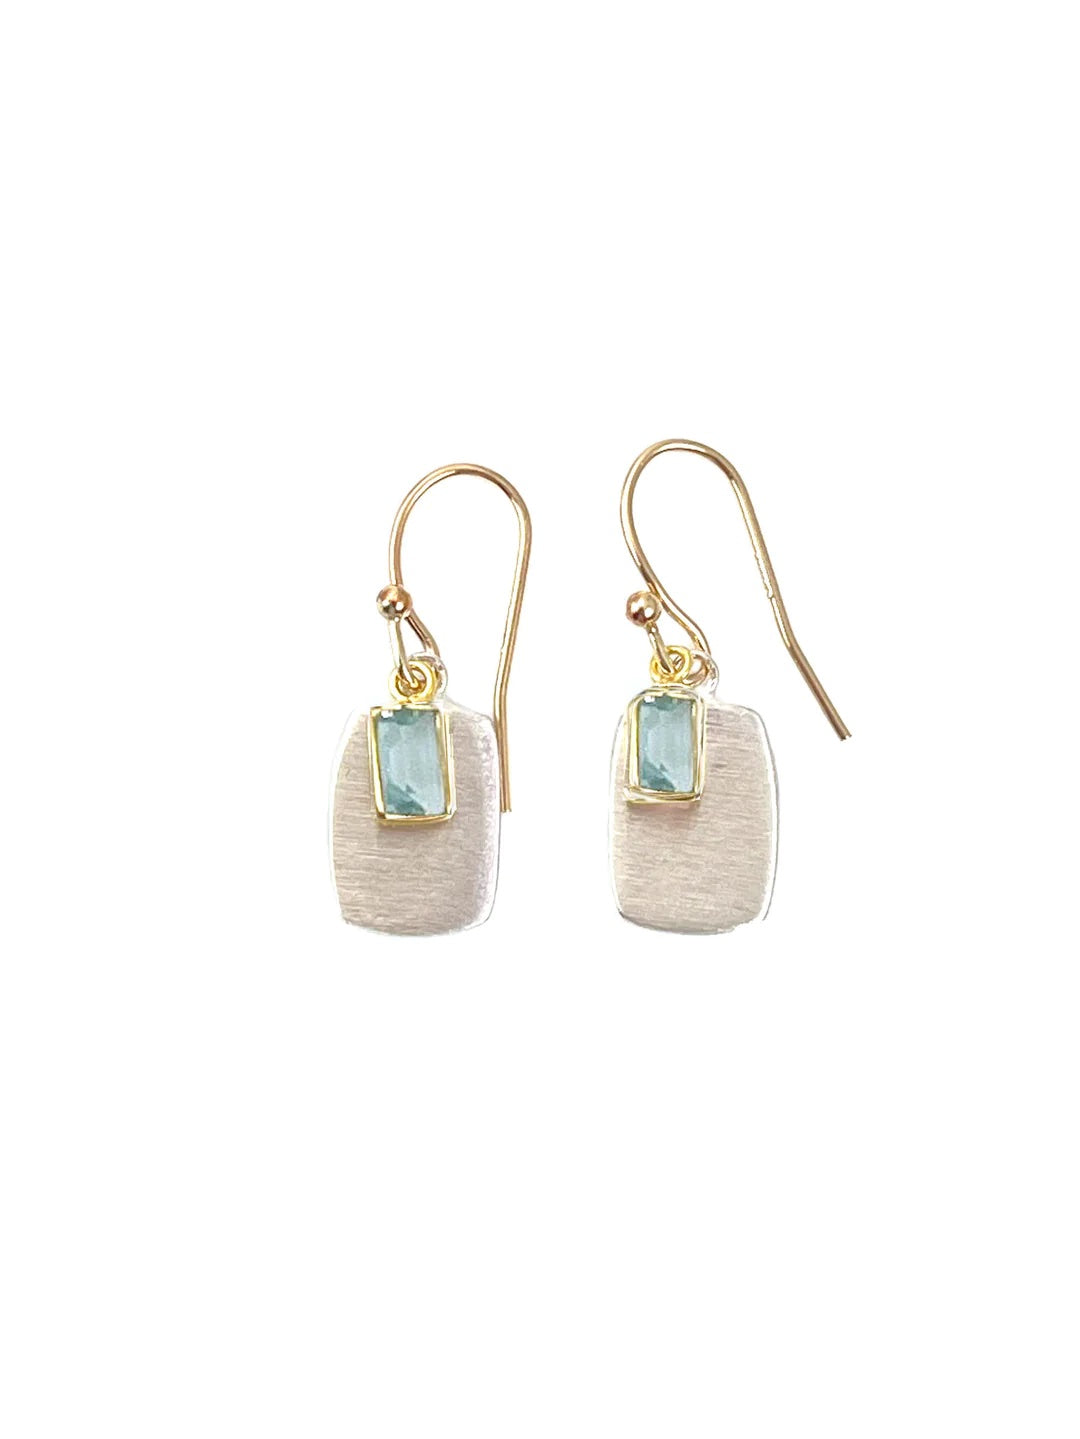 Earrings from Philippa Roberts